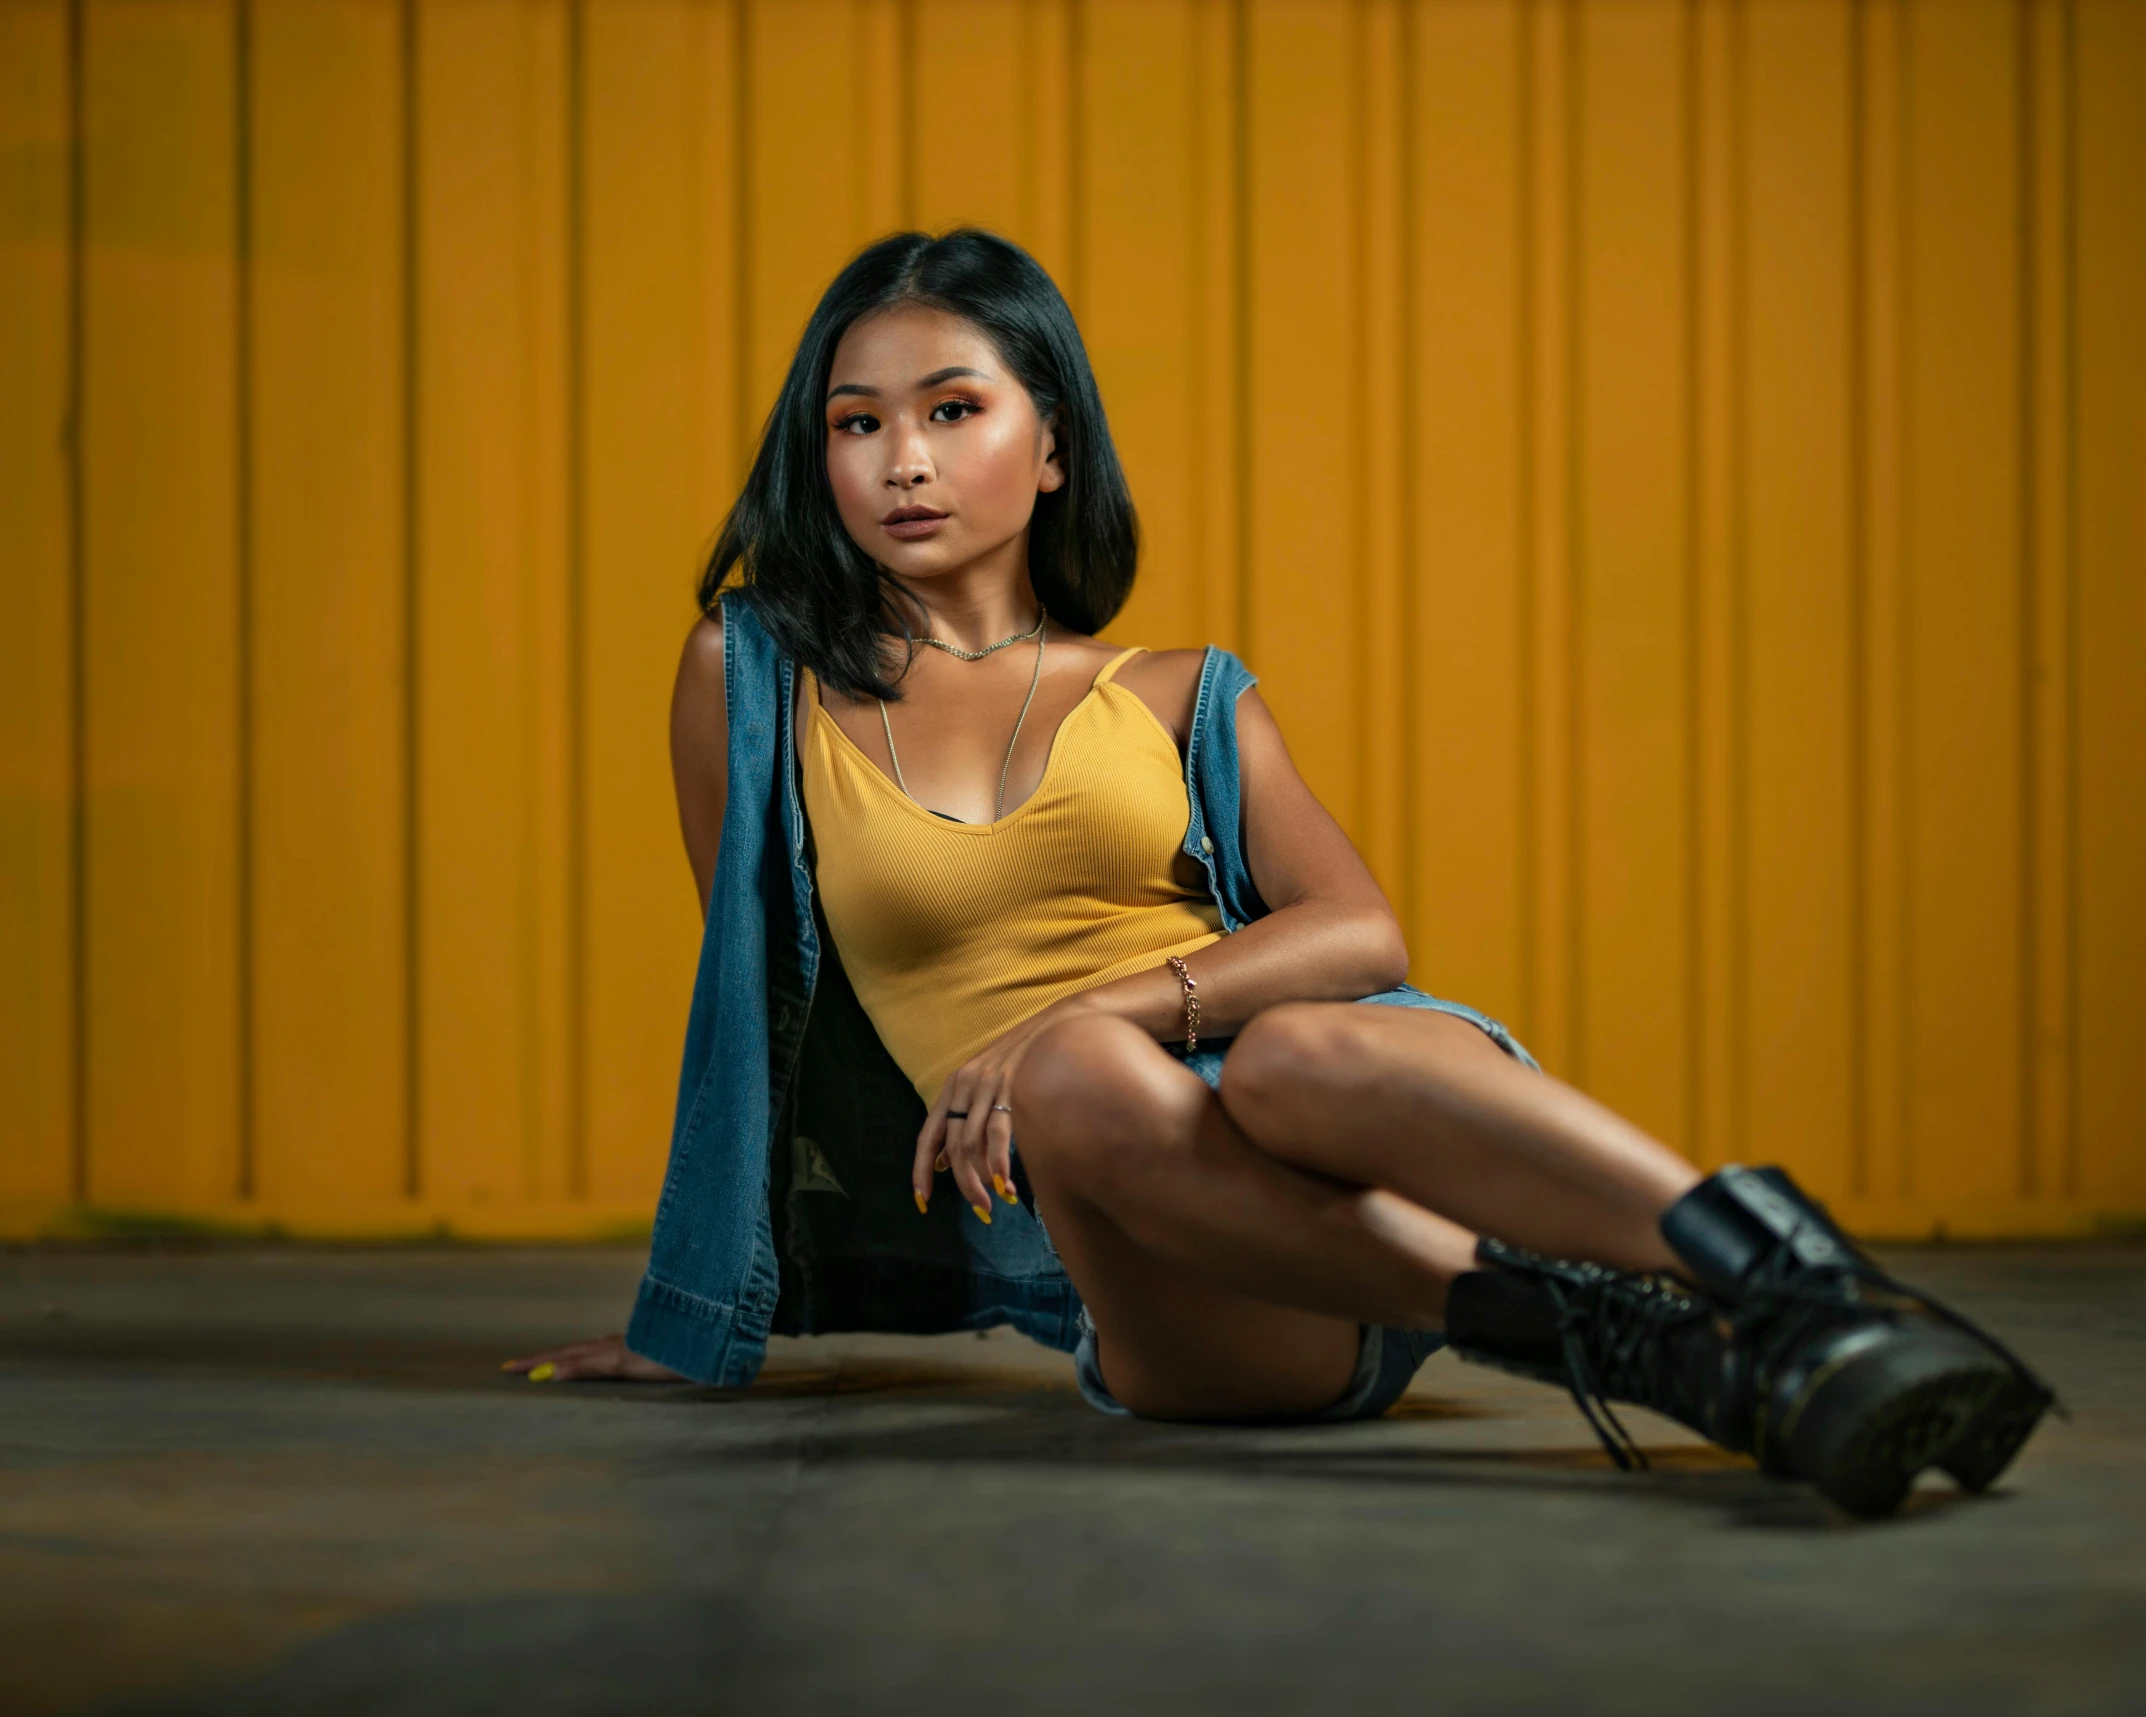 a woman sitting on the ground in front of a yellow wall, by Ric Estrada, pexels contest winner, hyperrealism, wearing a camisole and boots, young asian woman, badass pose, looking confident